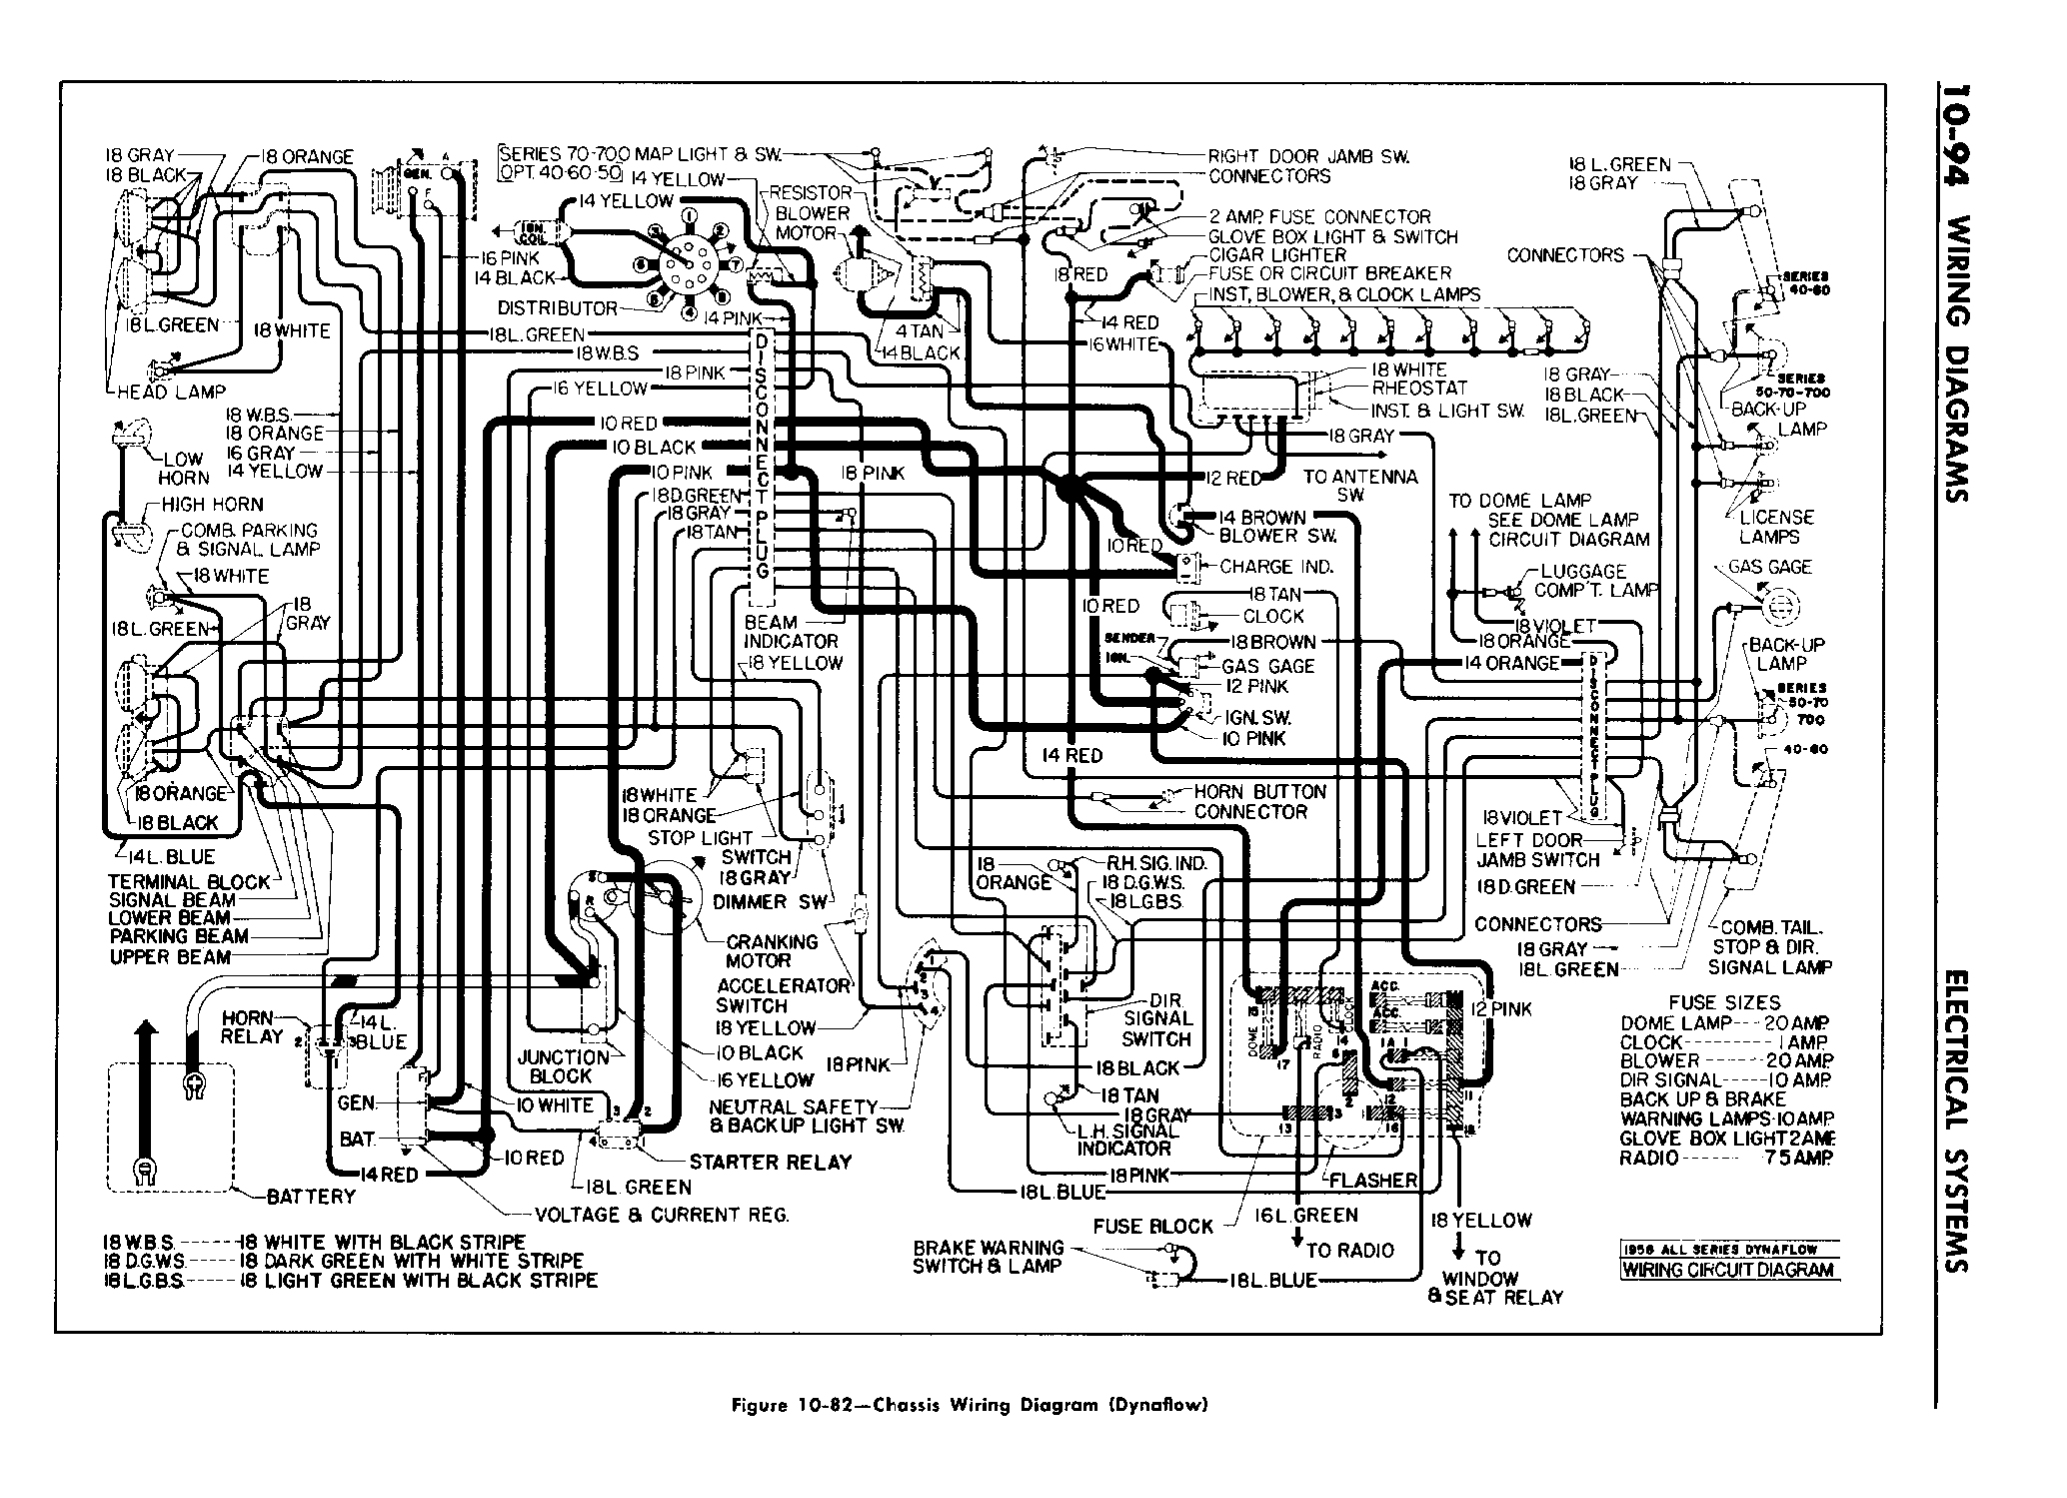 n_11 1958 Buick Shop Manual - Electrical Systems_94.jpg